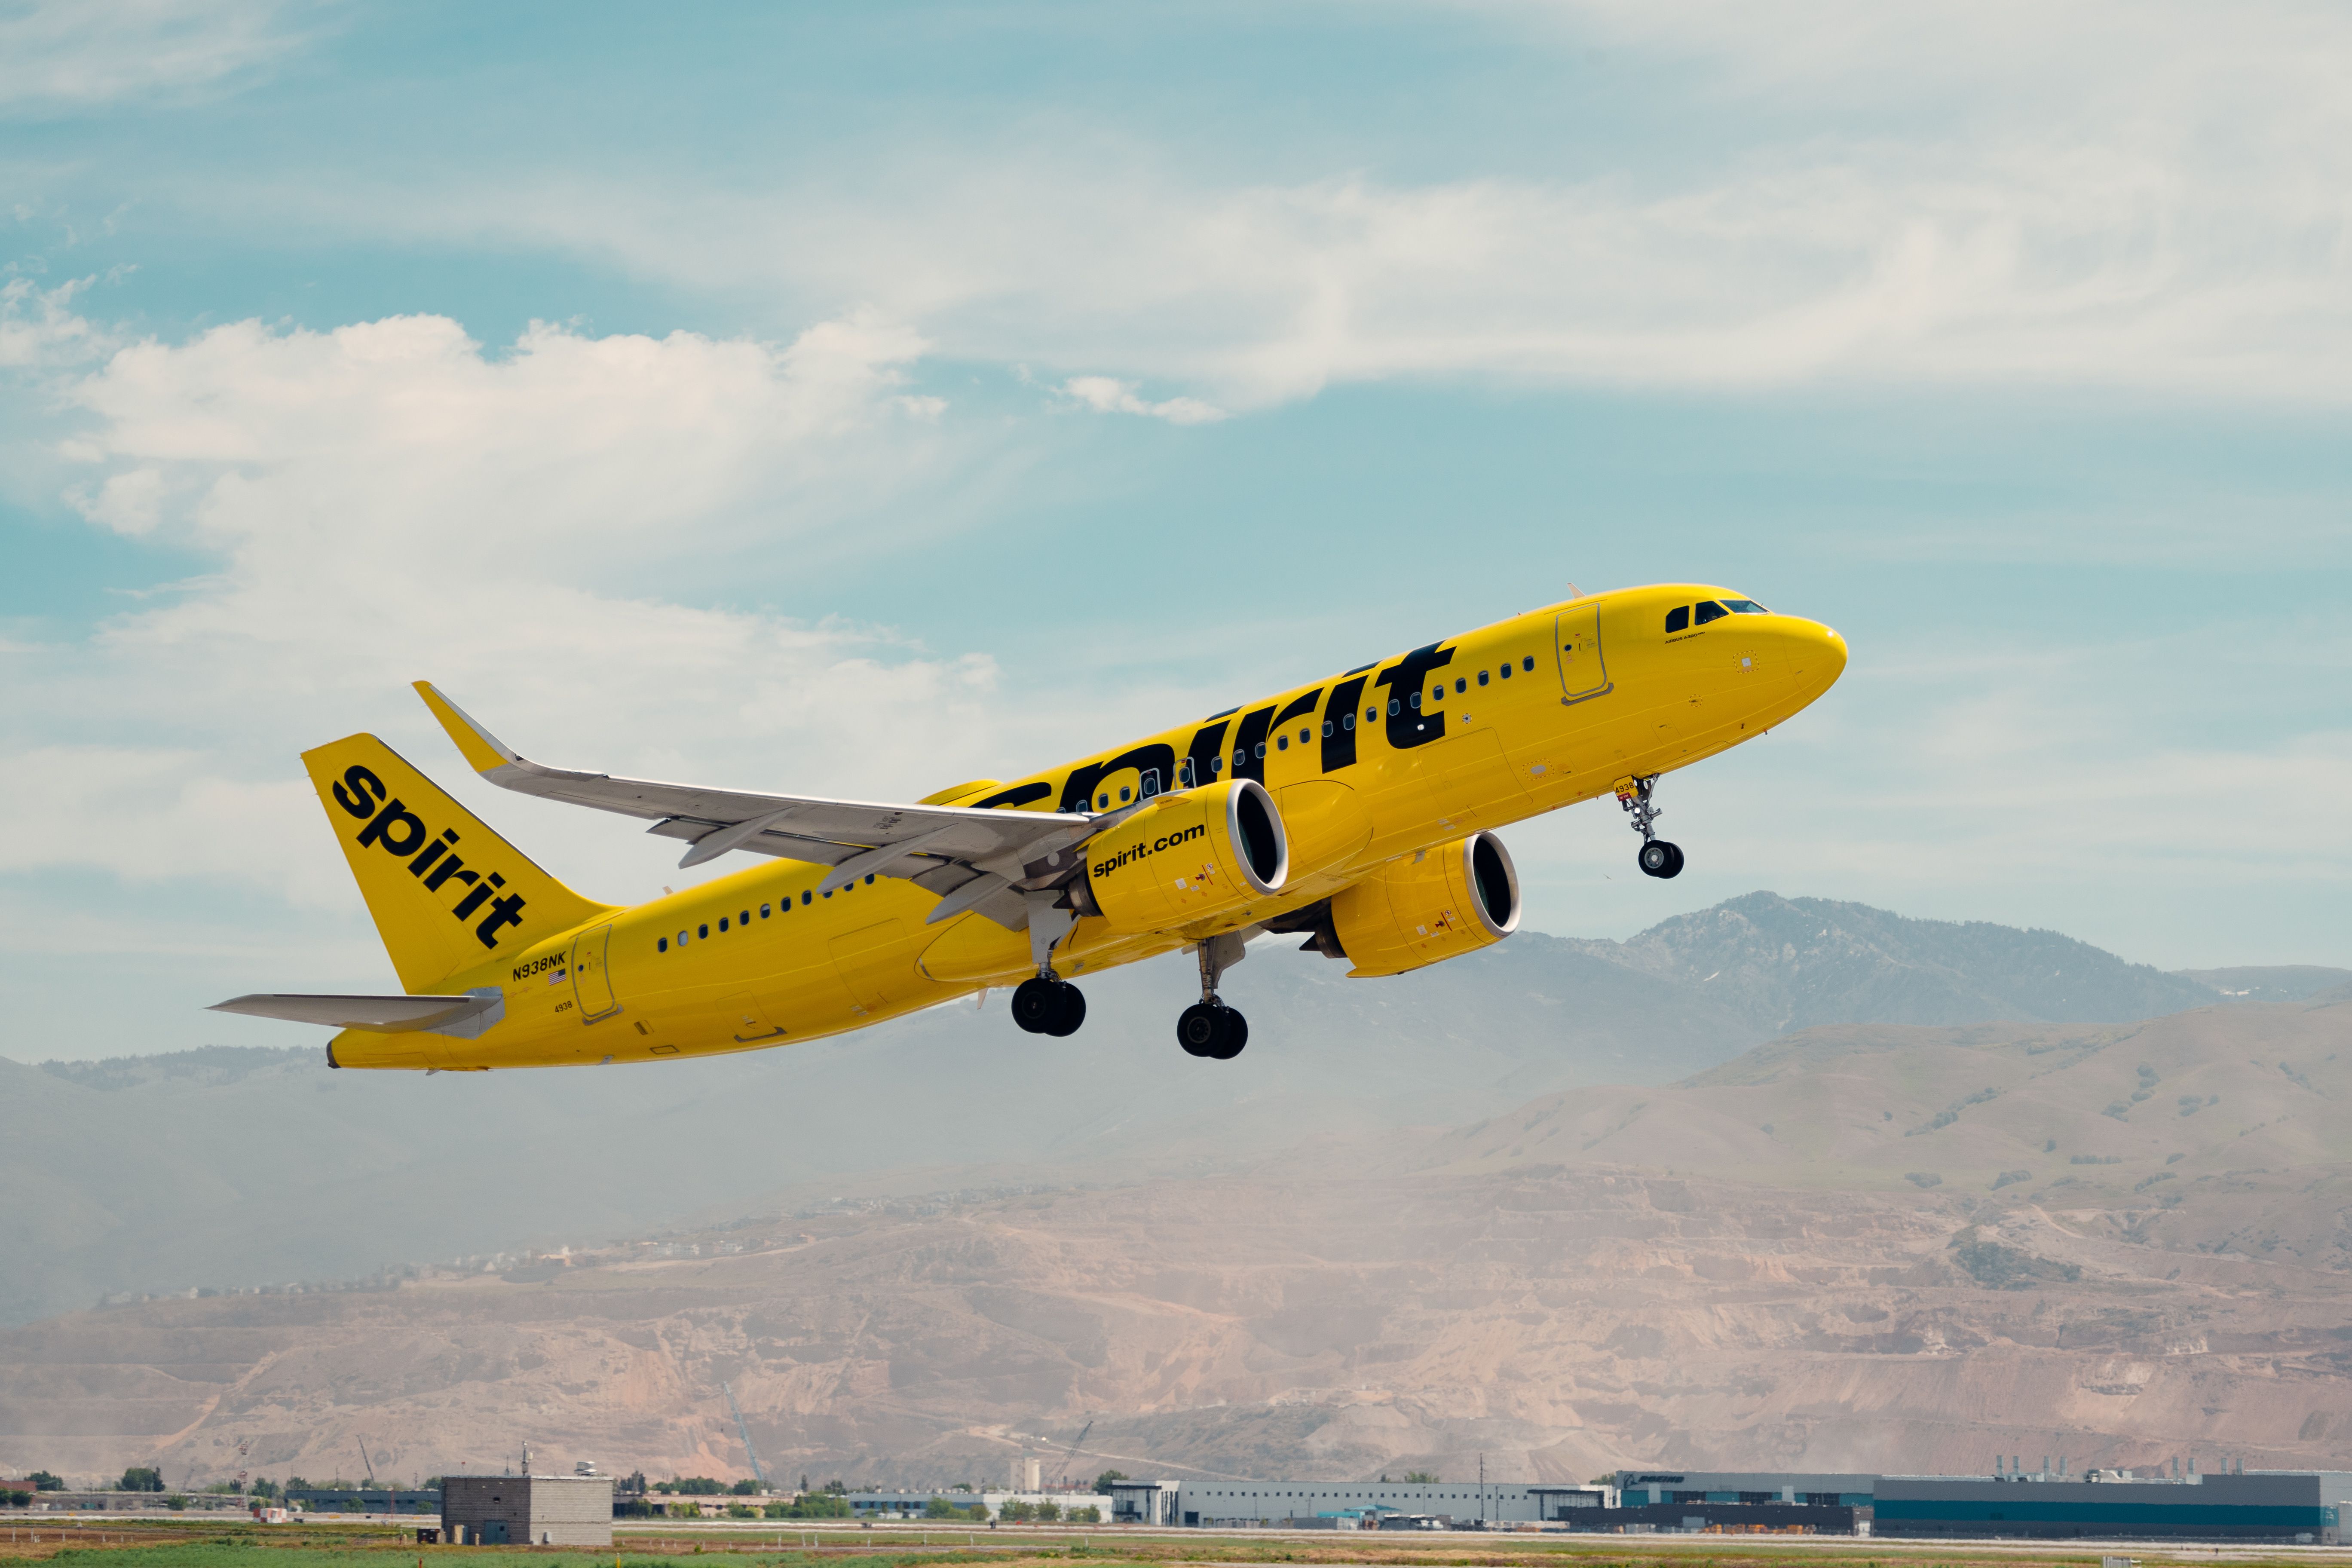 A Spirit Airlines plane taking off.